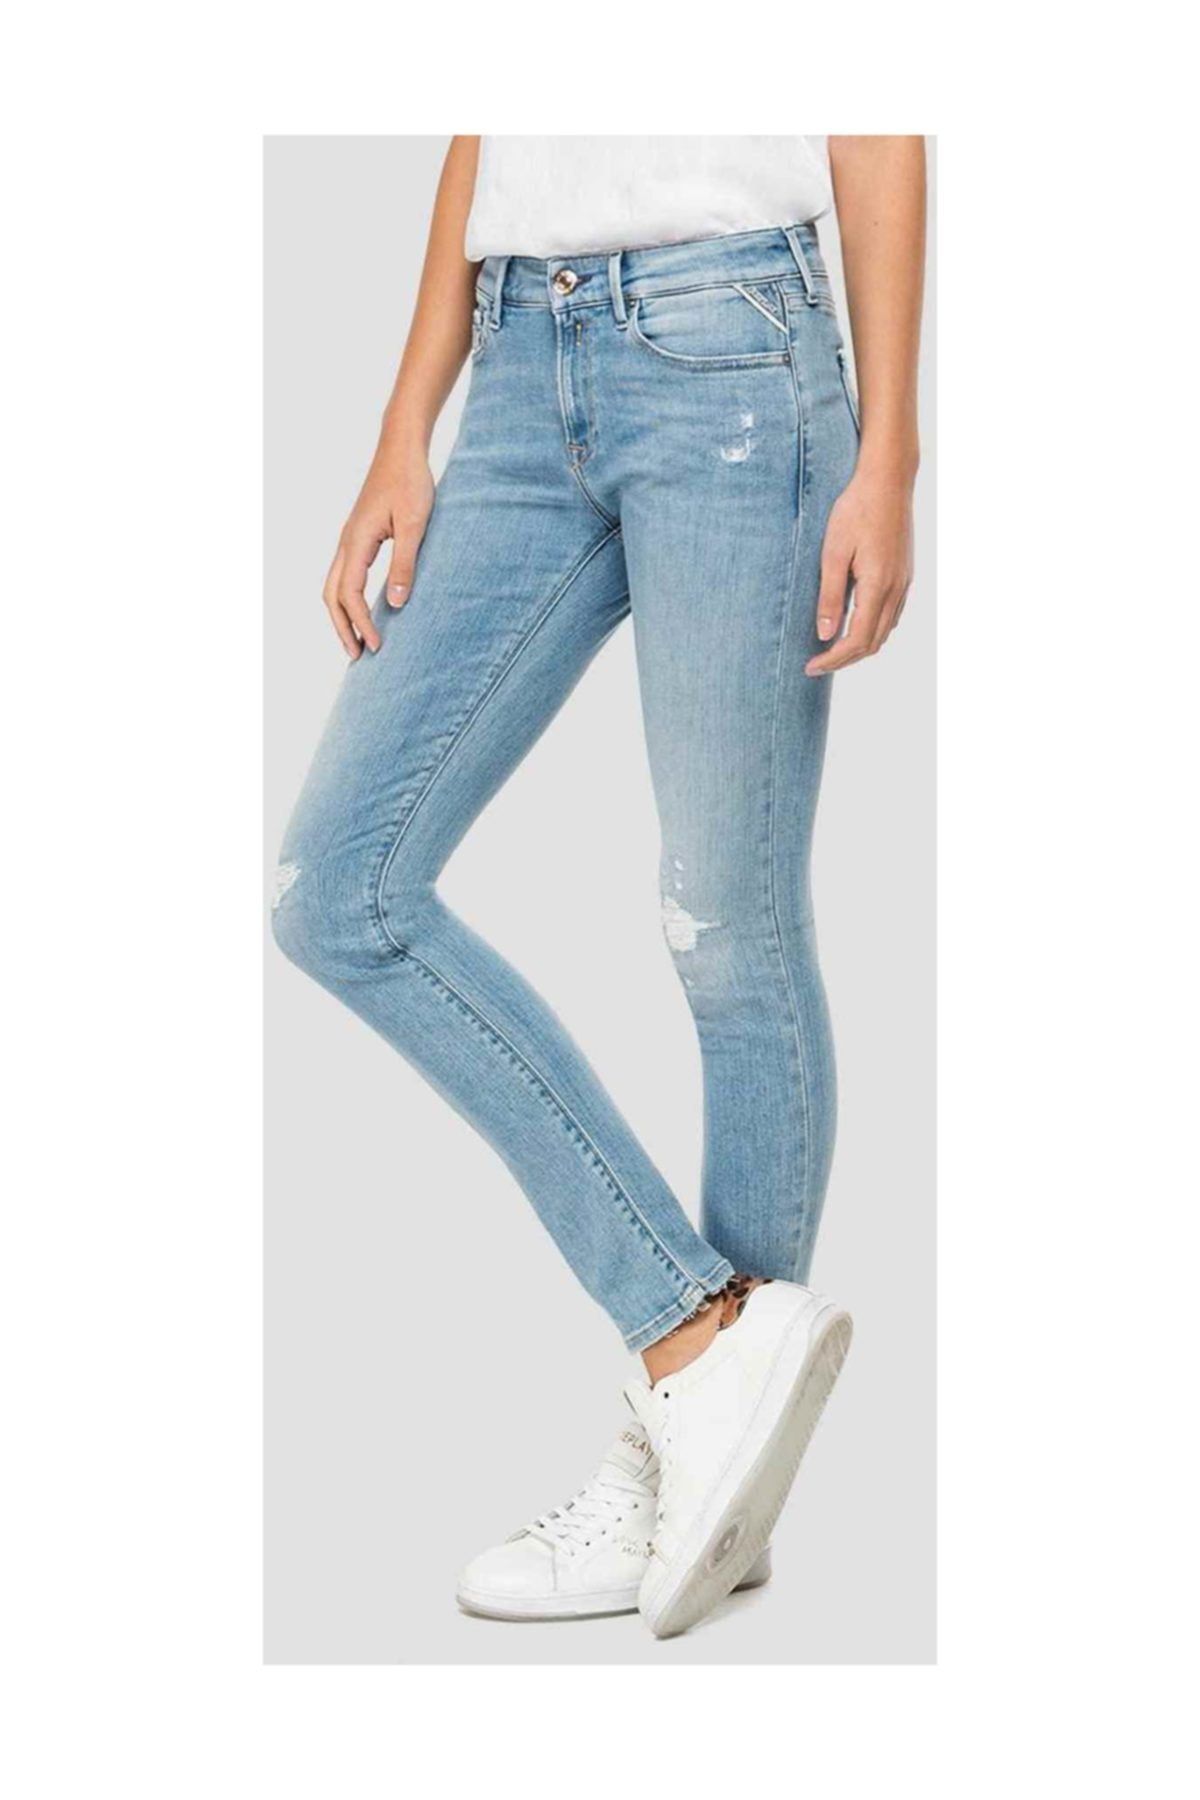 Replay Skinny High Waist Fit New Luz Jeans